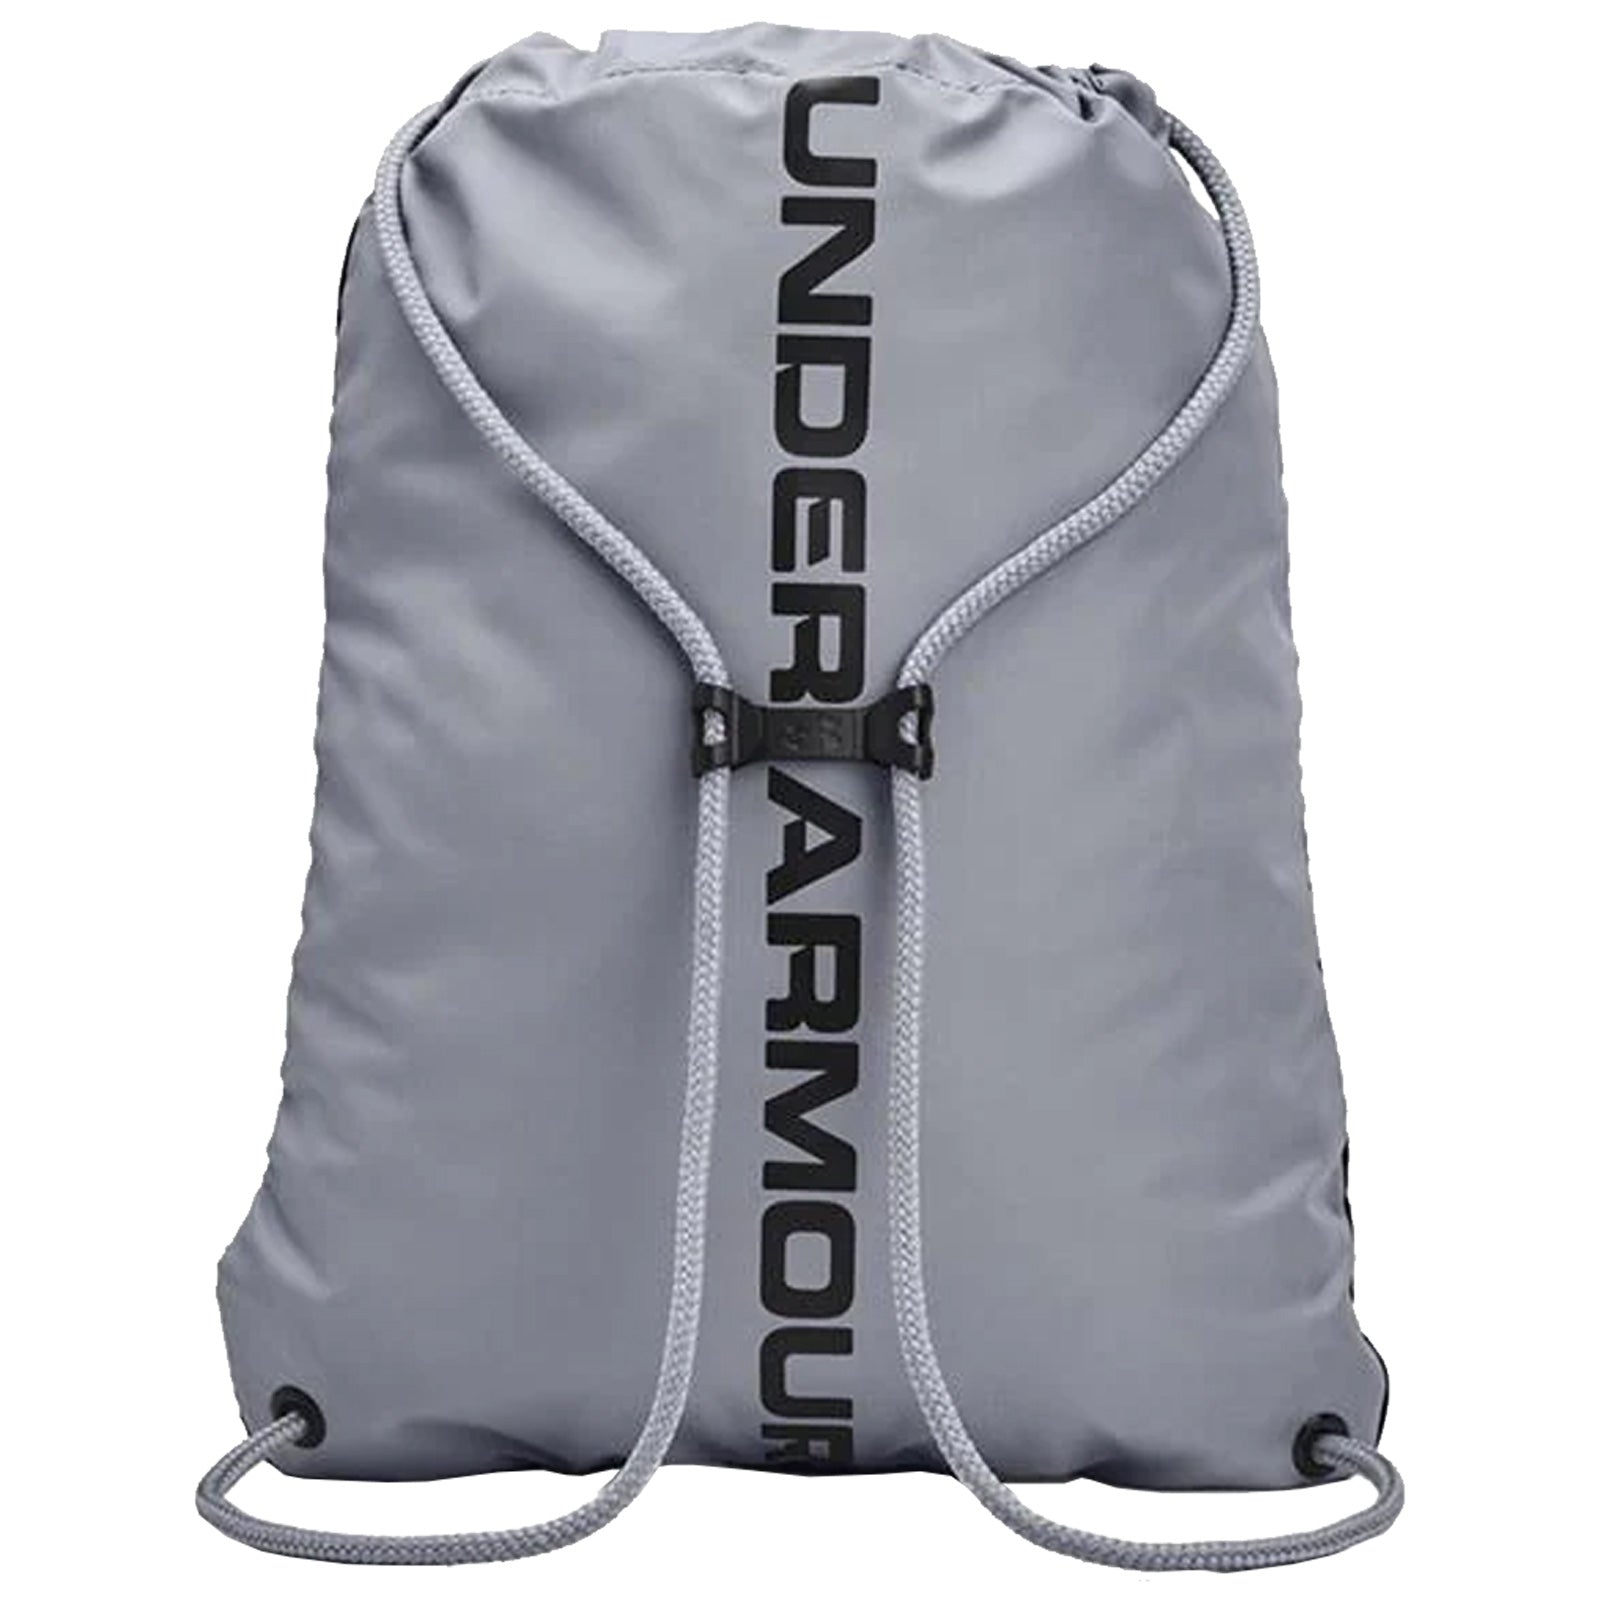 Under Armour Ozsee Sackpack Bag